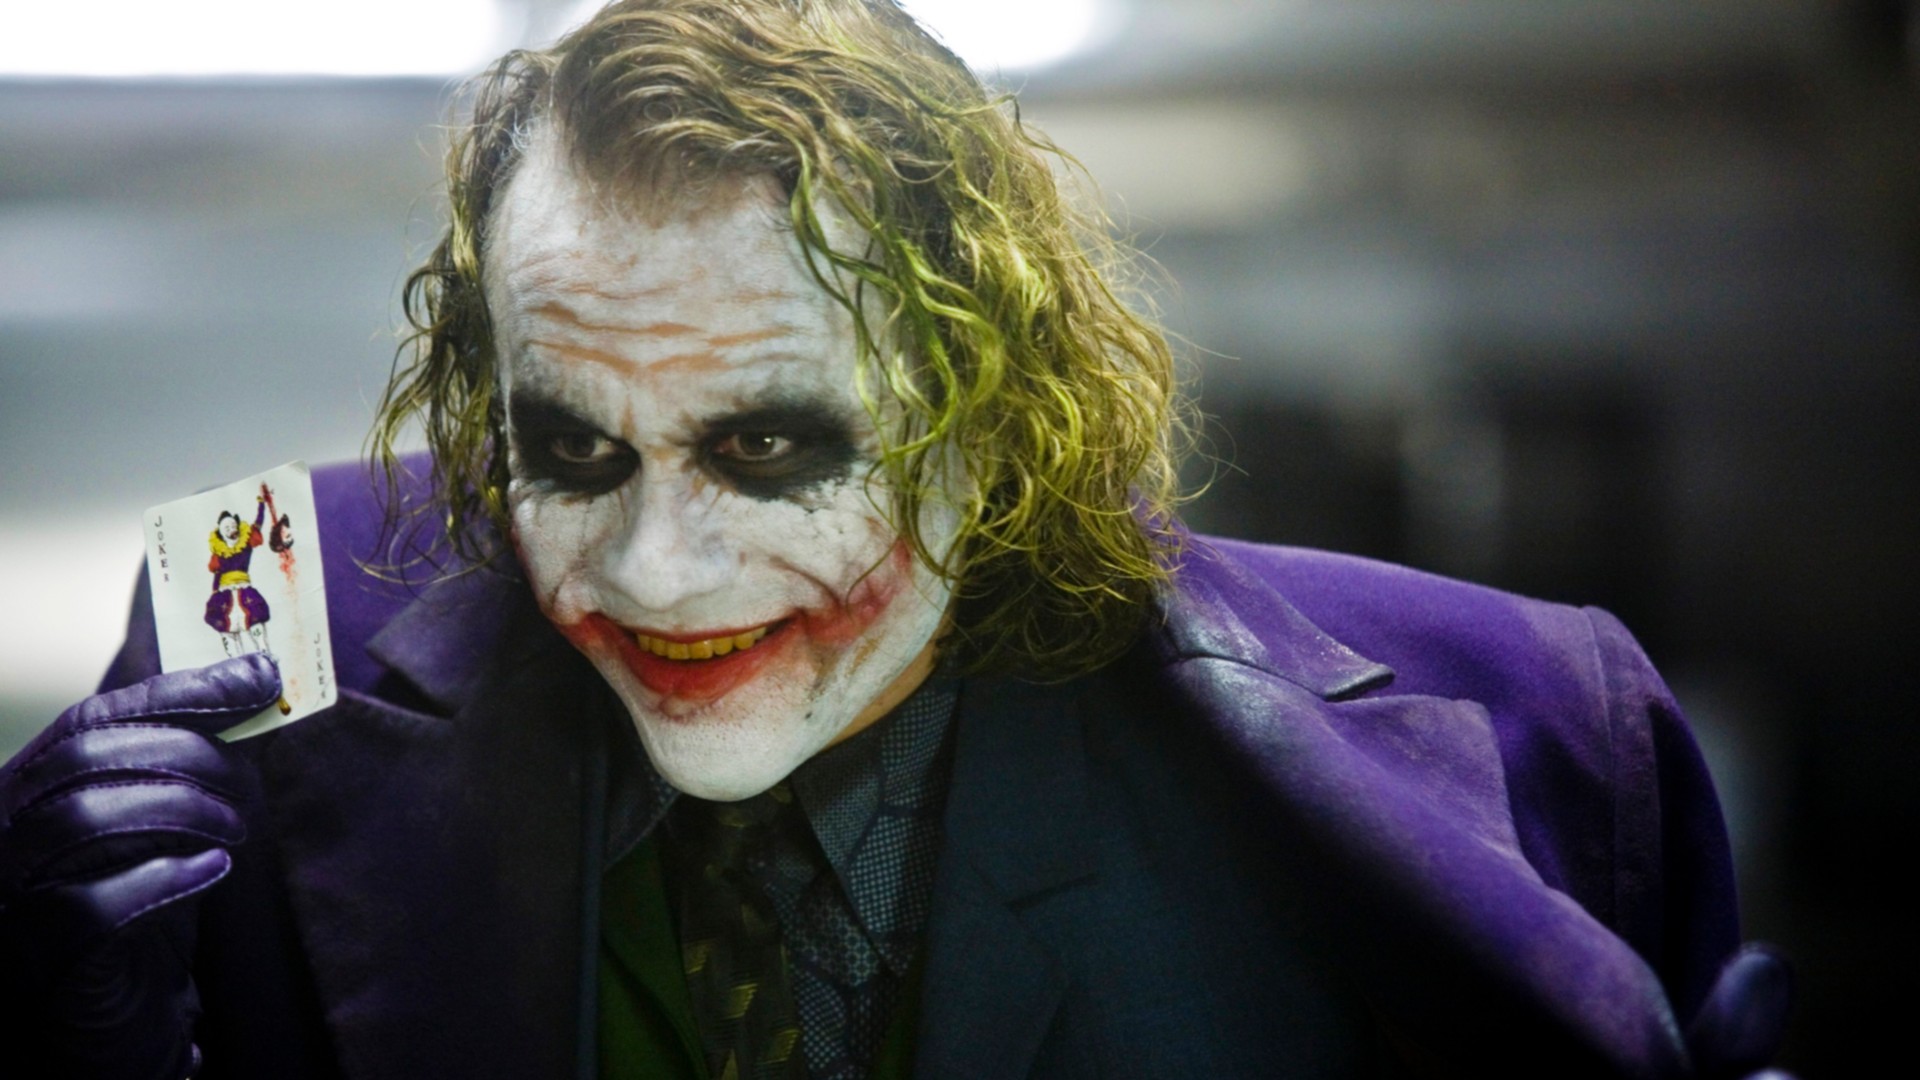 Heath Joker Without Scars and Makeup Looks Even Creepier